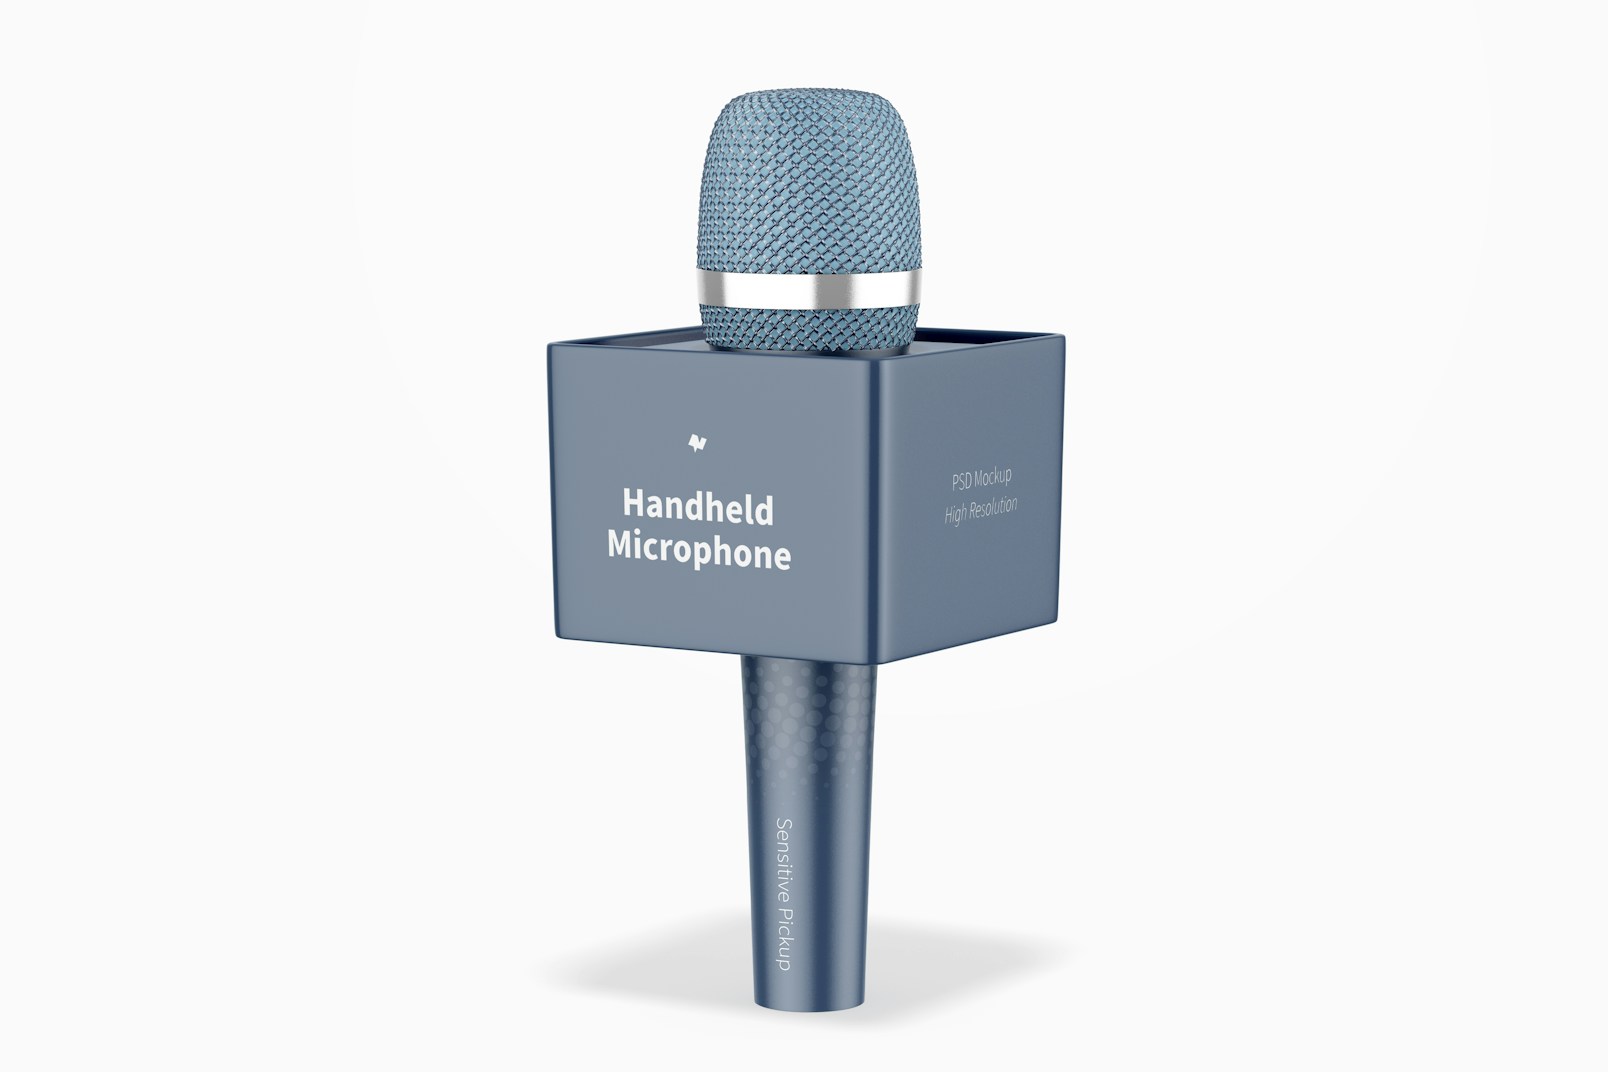 Handheld Microphone with Cube Mockup, Front View